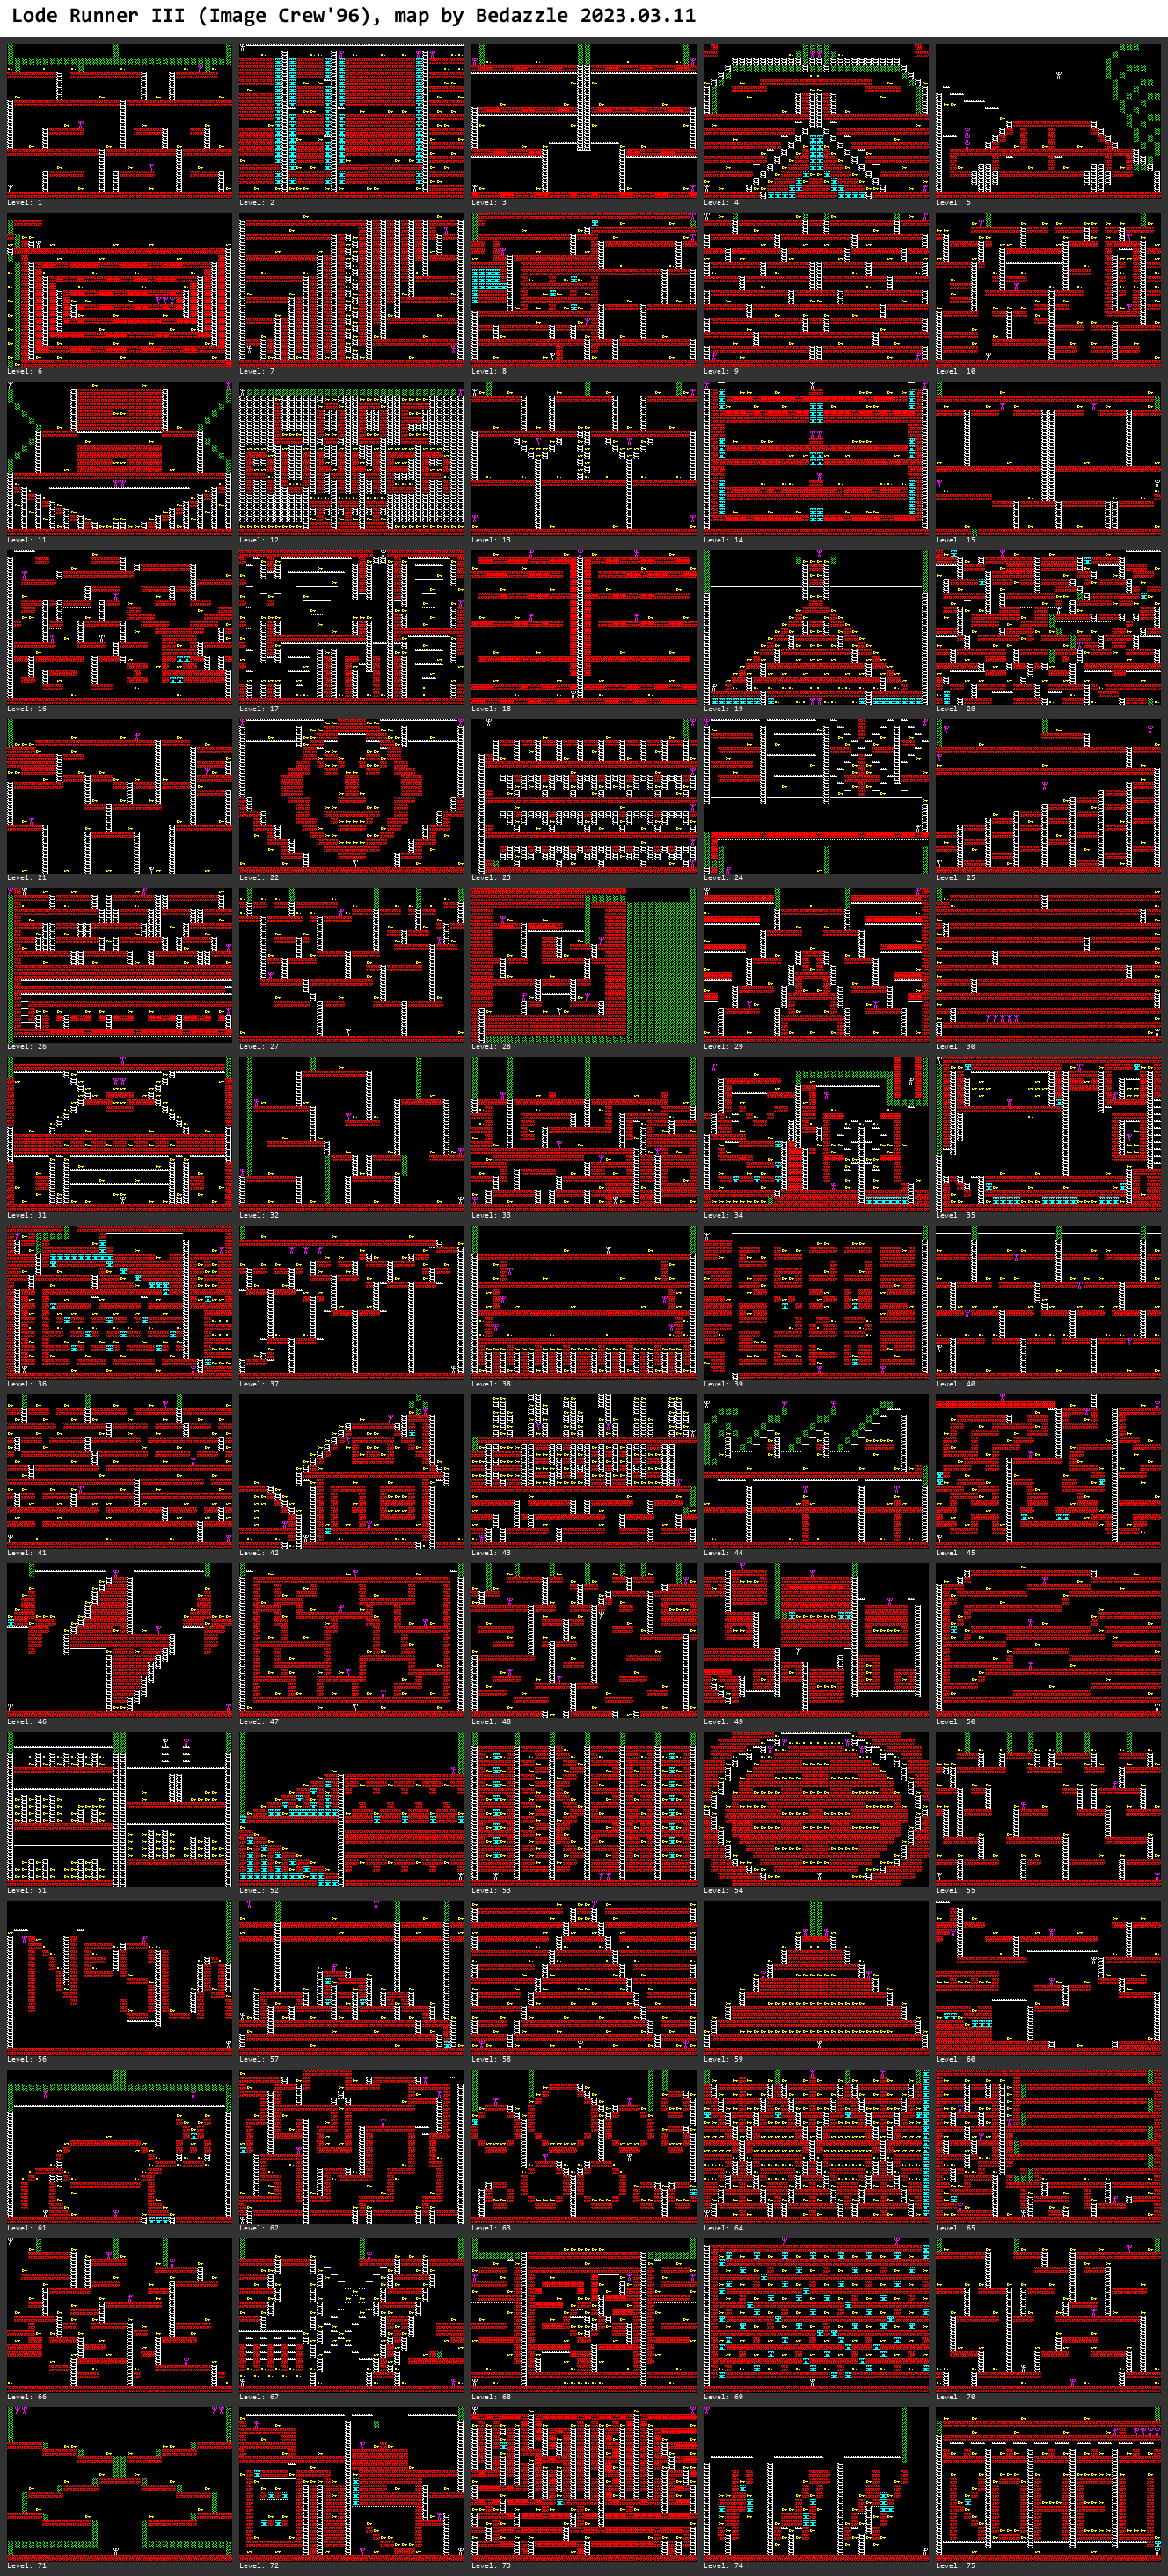 Lode Runner 3 (Image Crew) - The Map